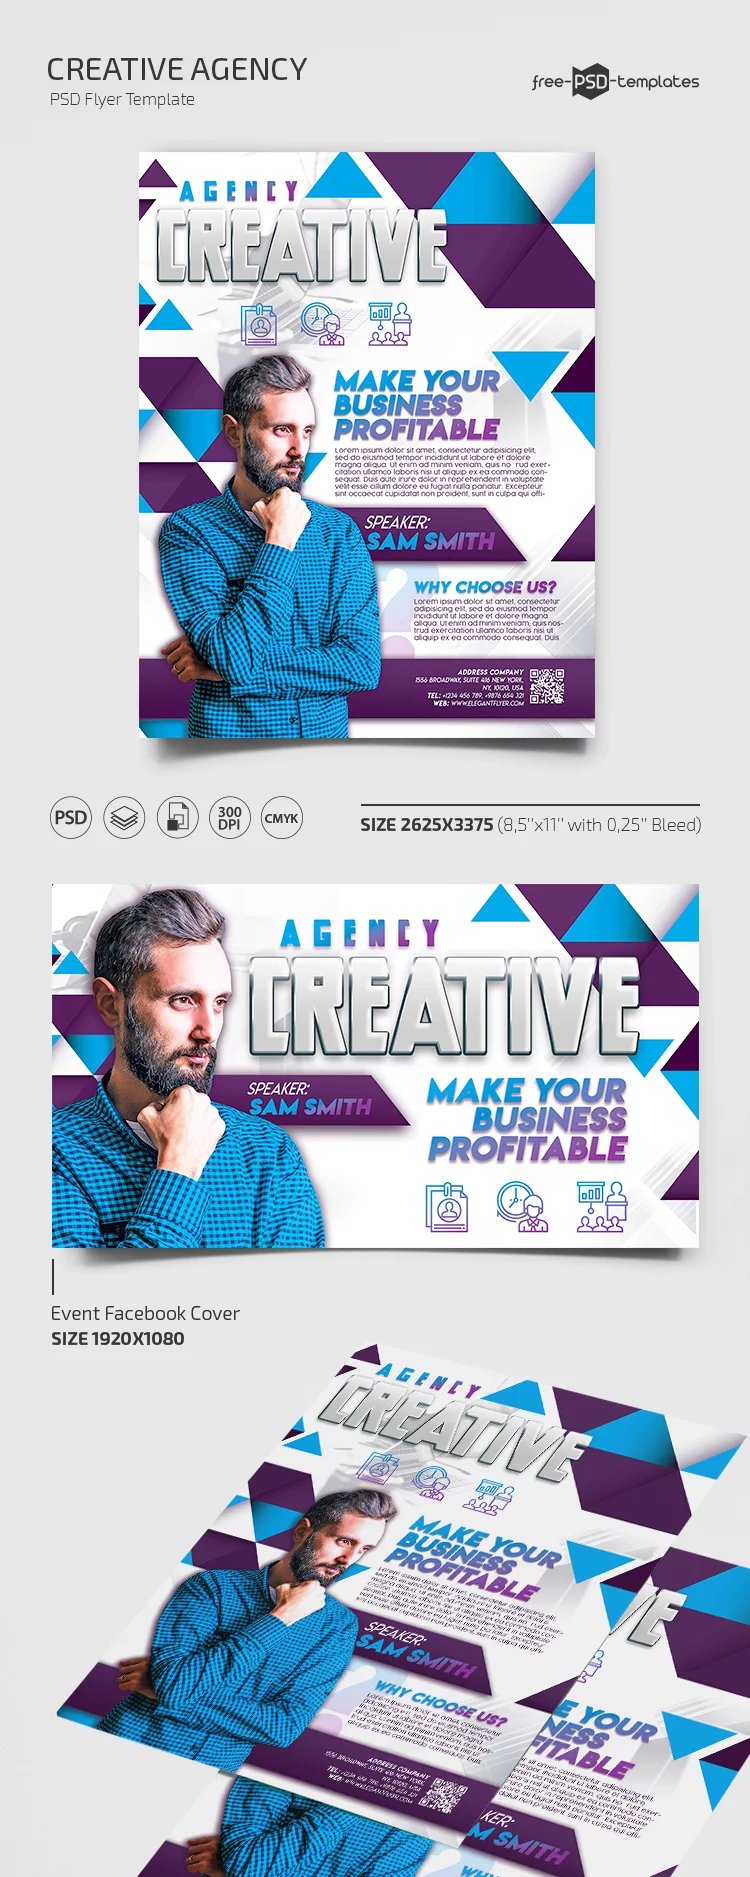 Free Creative Agency Flyer Template in PSD